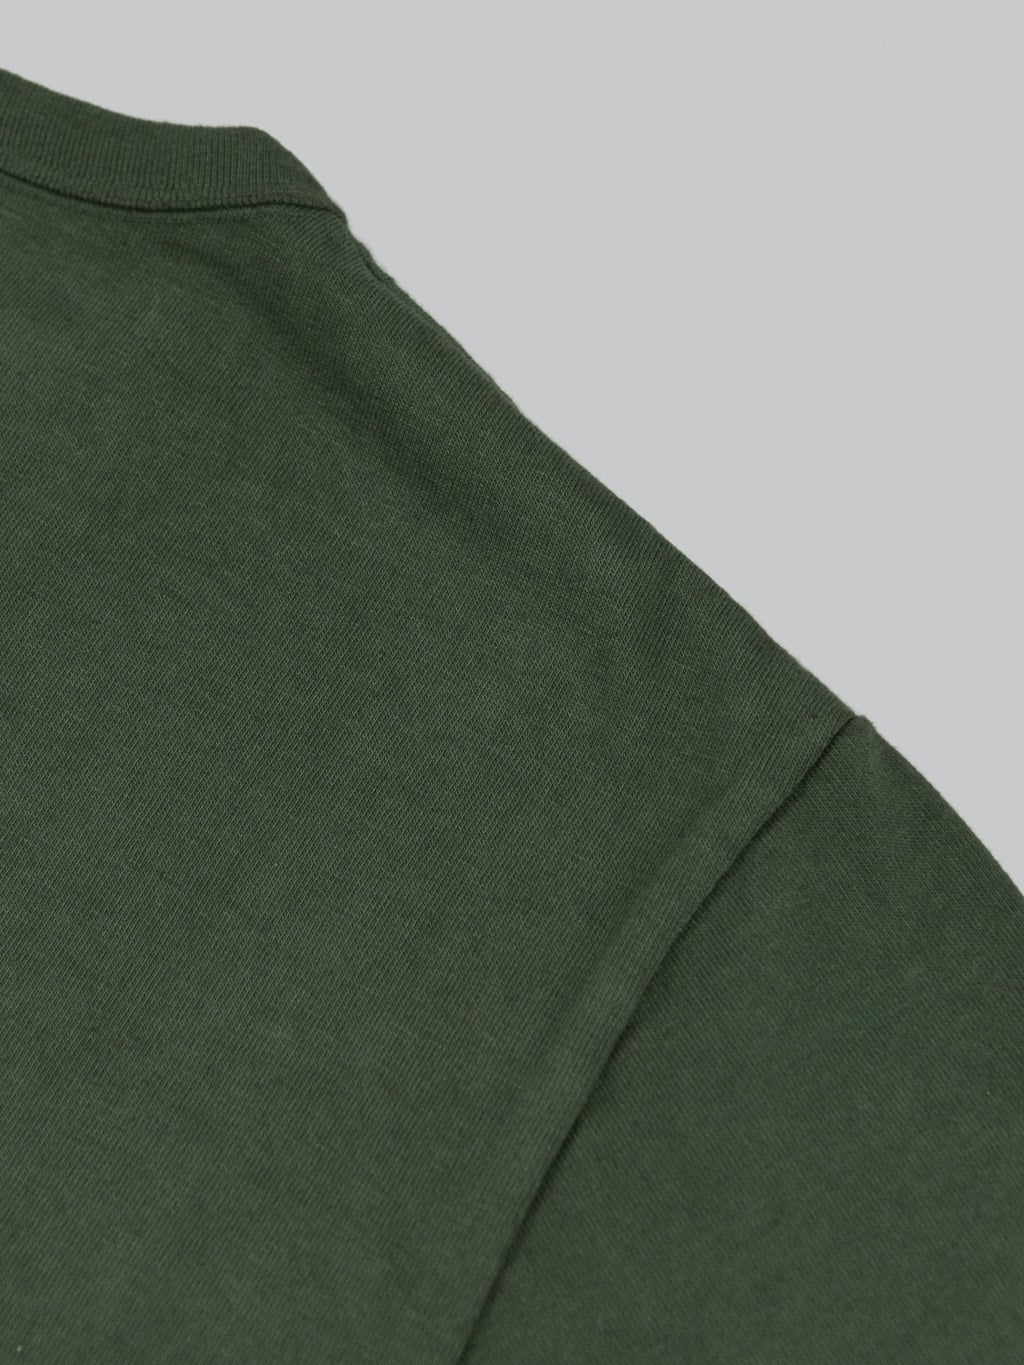 trophy clothing od henley tee olive seam